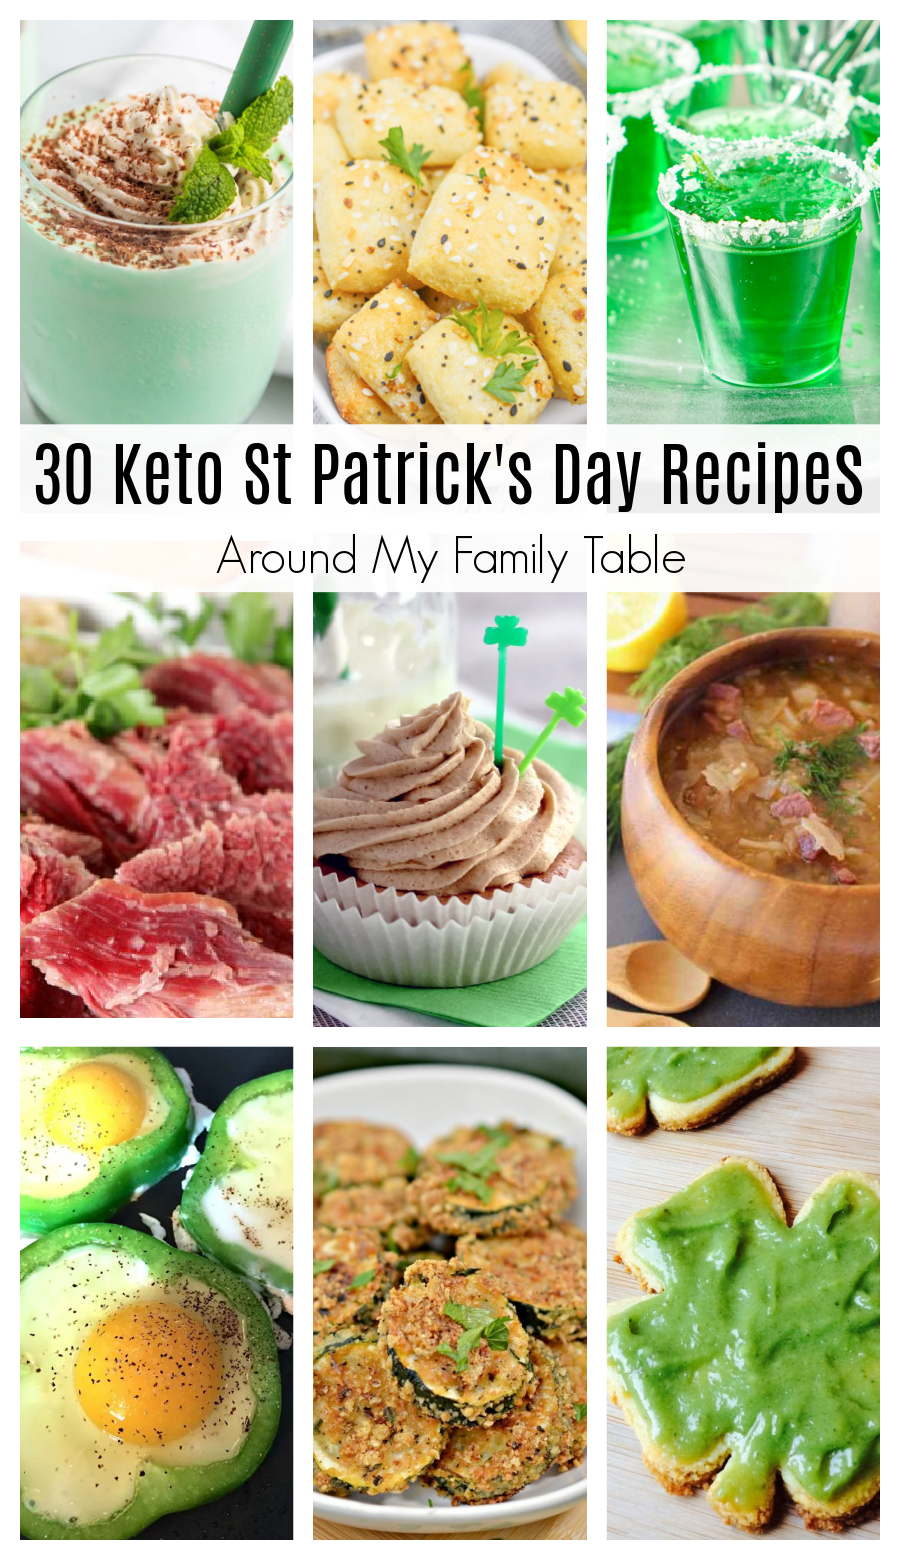 St. Patrick’s Day is one of my favorite holidays. I just love the food. So I’ve rounded up some Keto St Patrick’s Day Recipes to share with y’all today! via @slingmama